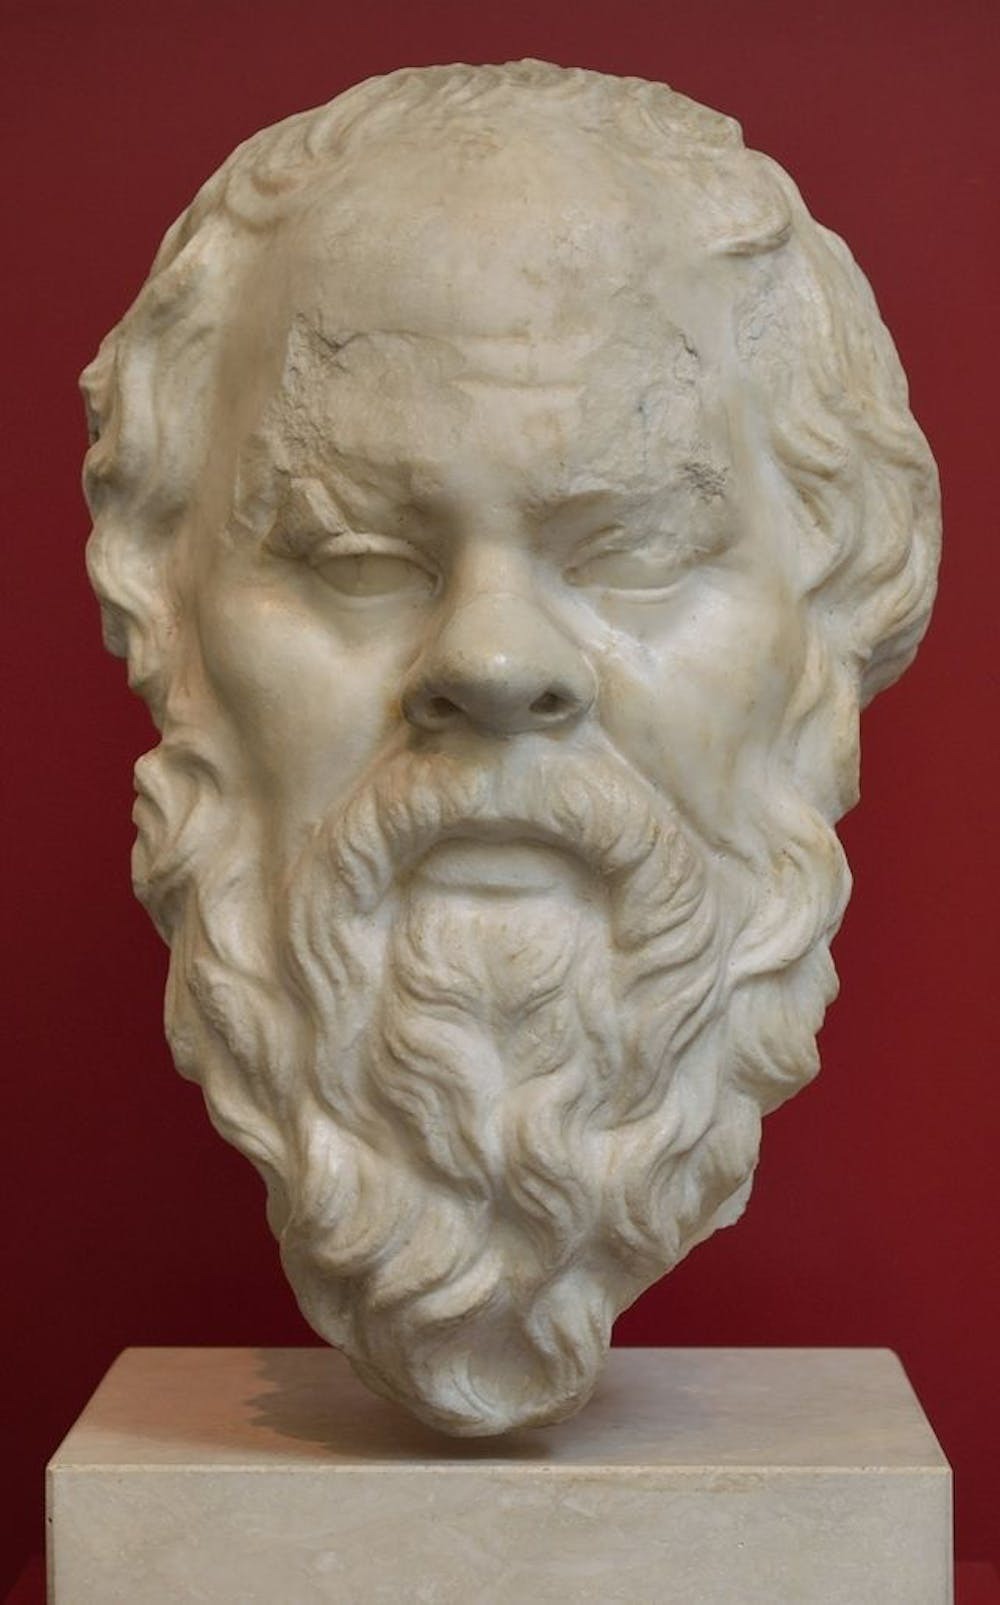 Head of Socrates in Palazzo Massimo alle Terme, Rome. Wikimedia commons, CC BY-SA